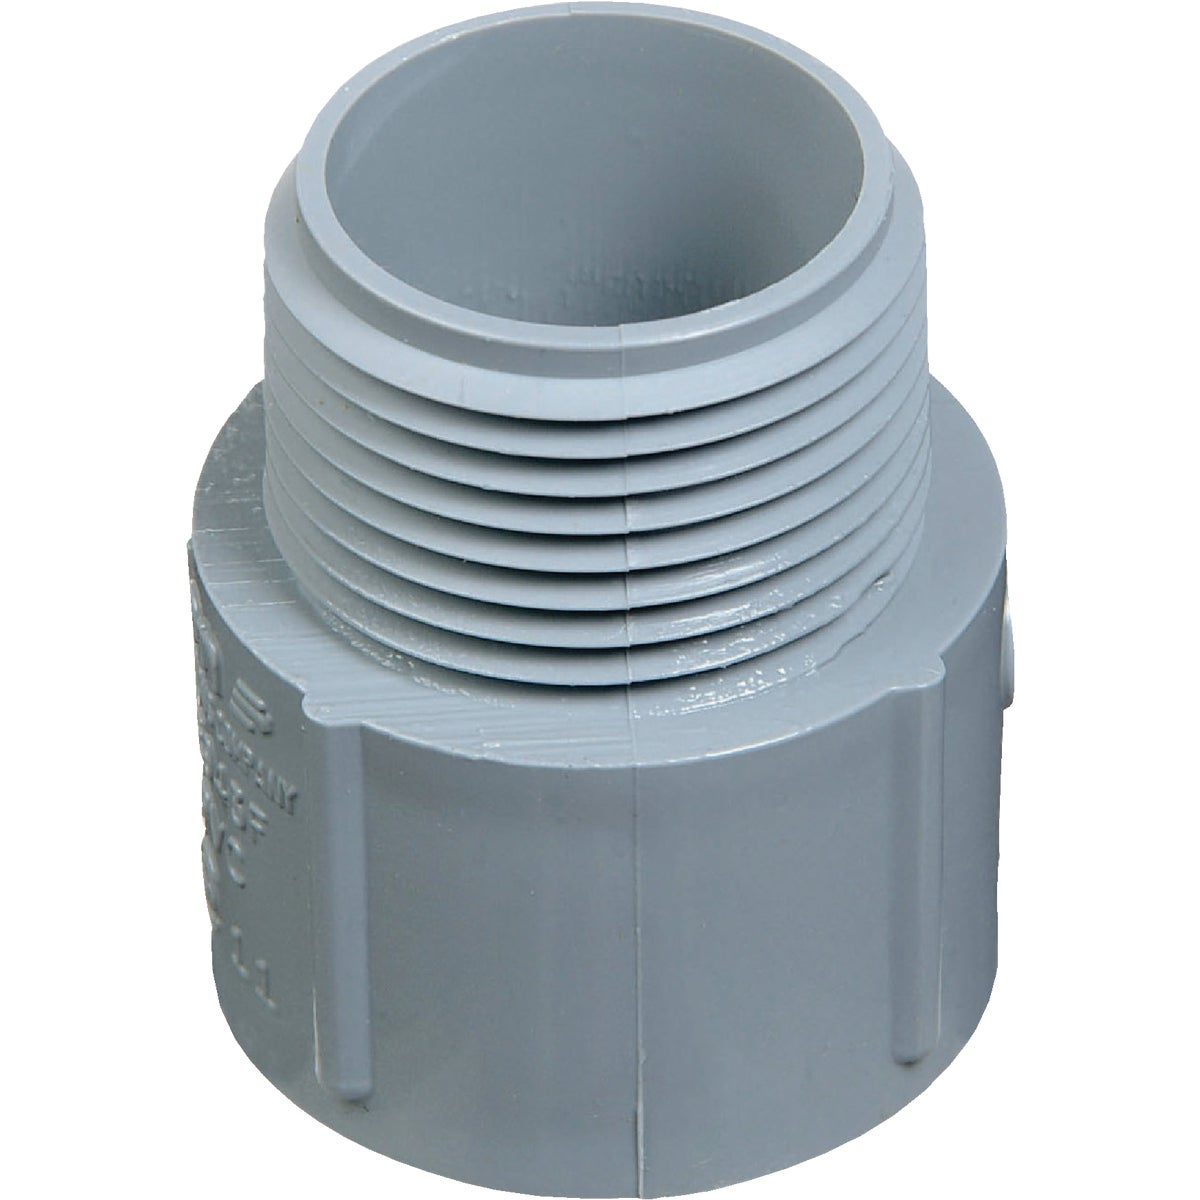 Item 508533, Adapter ideal for adapting PVC (polyvinyl chloride) conduit to boxes, 